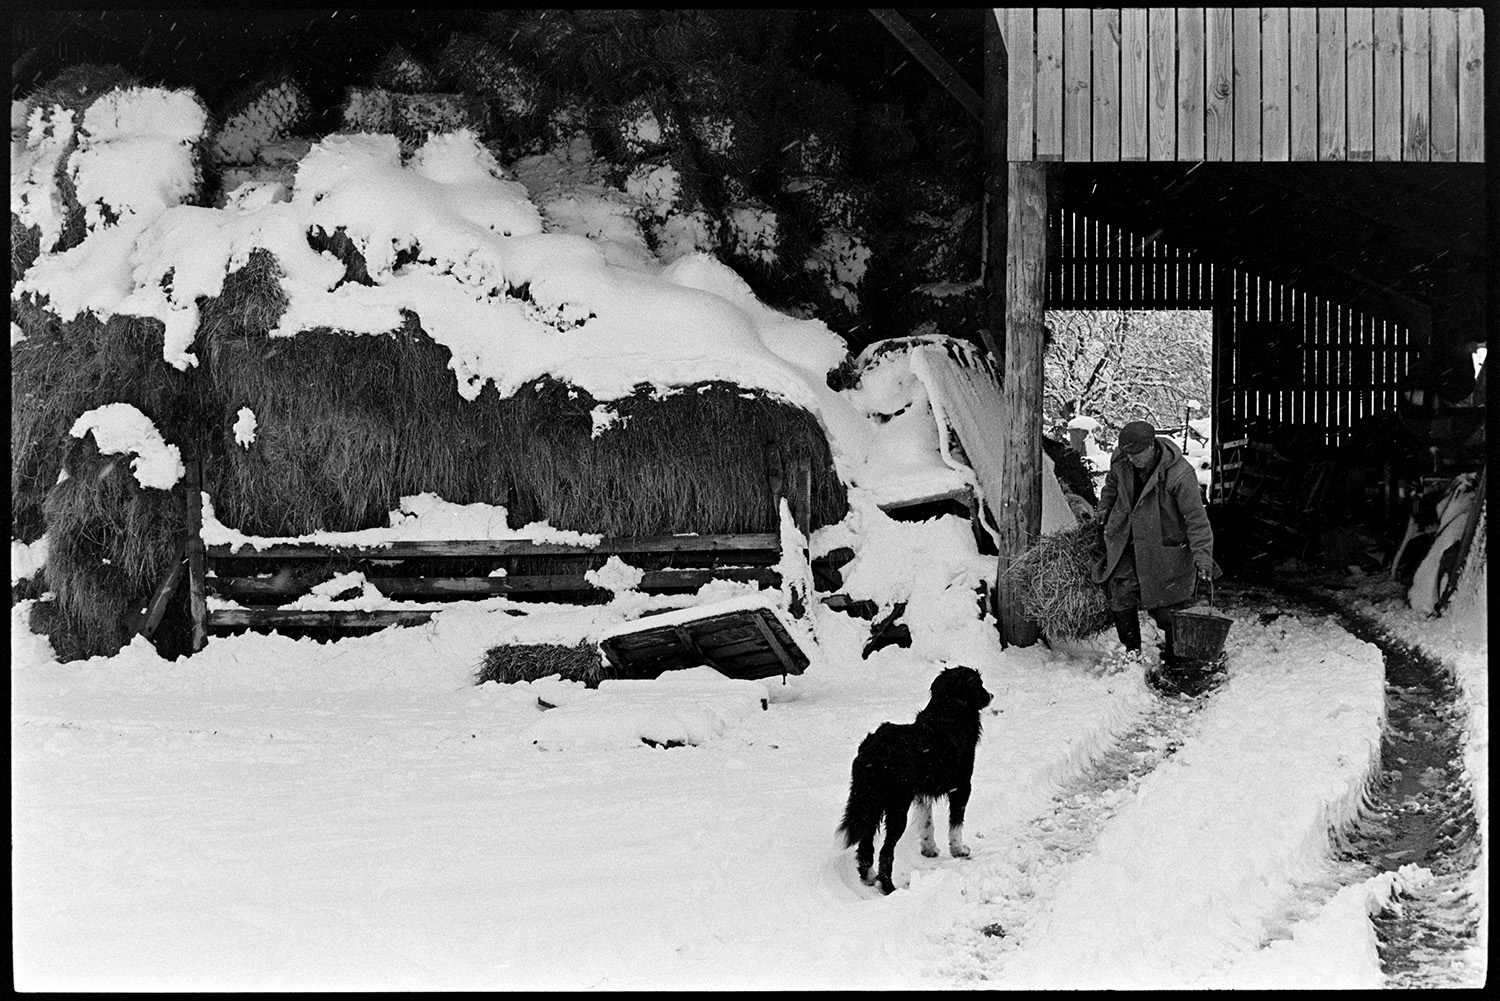 Snow, farmer taking hay to sheep, farmyard, barn with hay, counting sheep, lots of dogs. 
[George Ayre taking a hay bale from a barn at Ashwell, Dolton to feed to sheep. Other hay bales covered with snow can be seen in the barn. He is accompanied by a dog.]